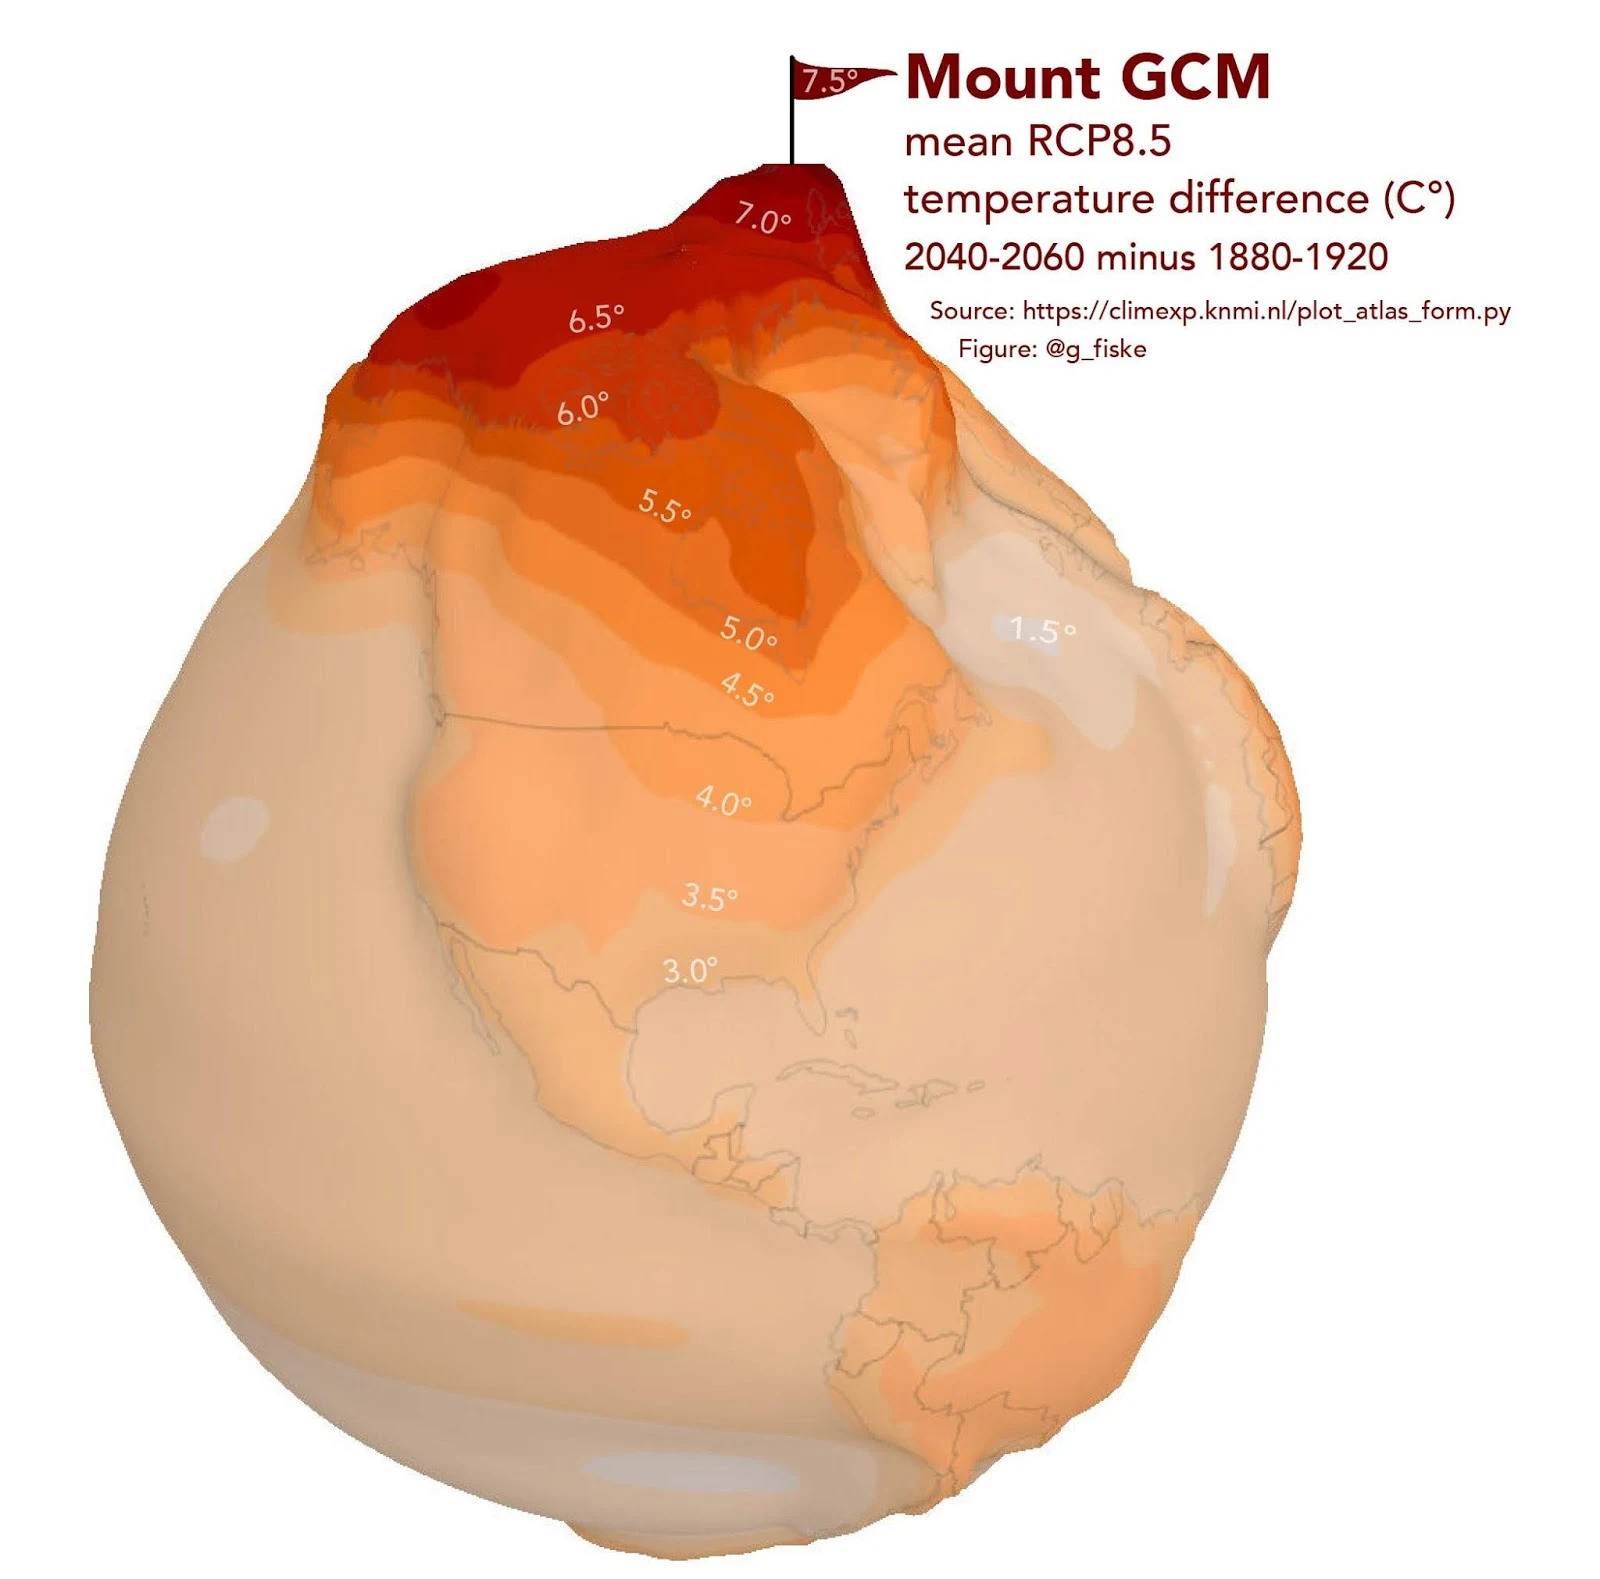 The Warming in the Arctic As a Mountain